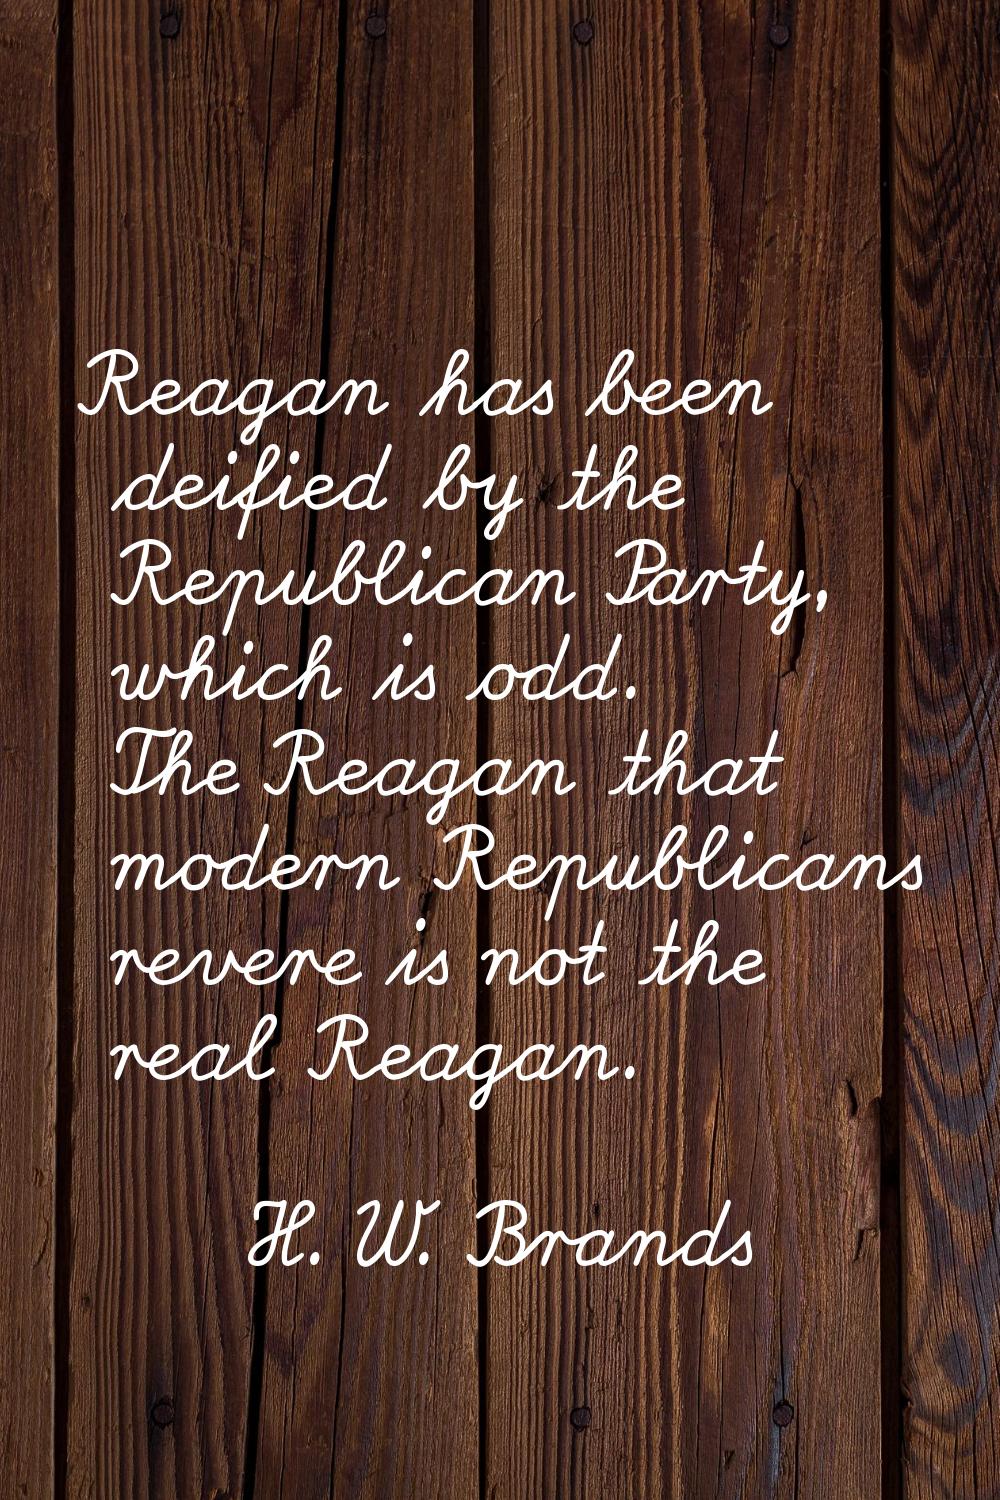 Reagan has been deified by the Republican Party, which is odd. The Reagan that modern Republicans r